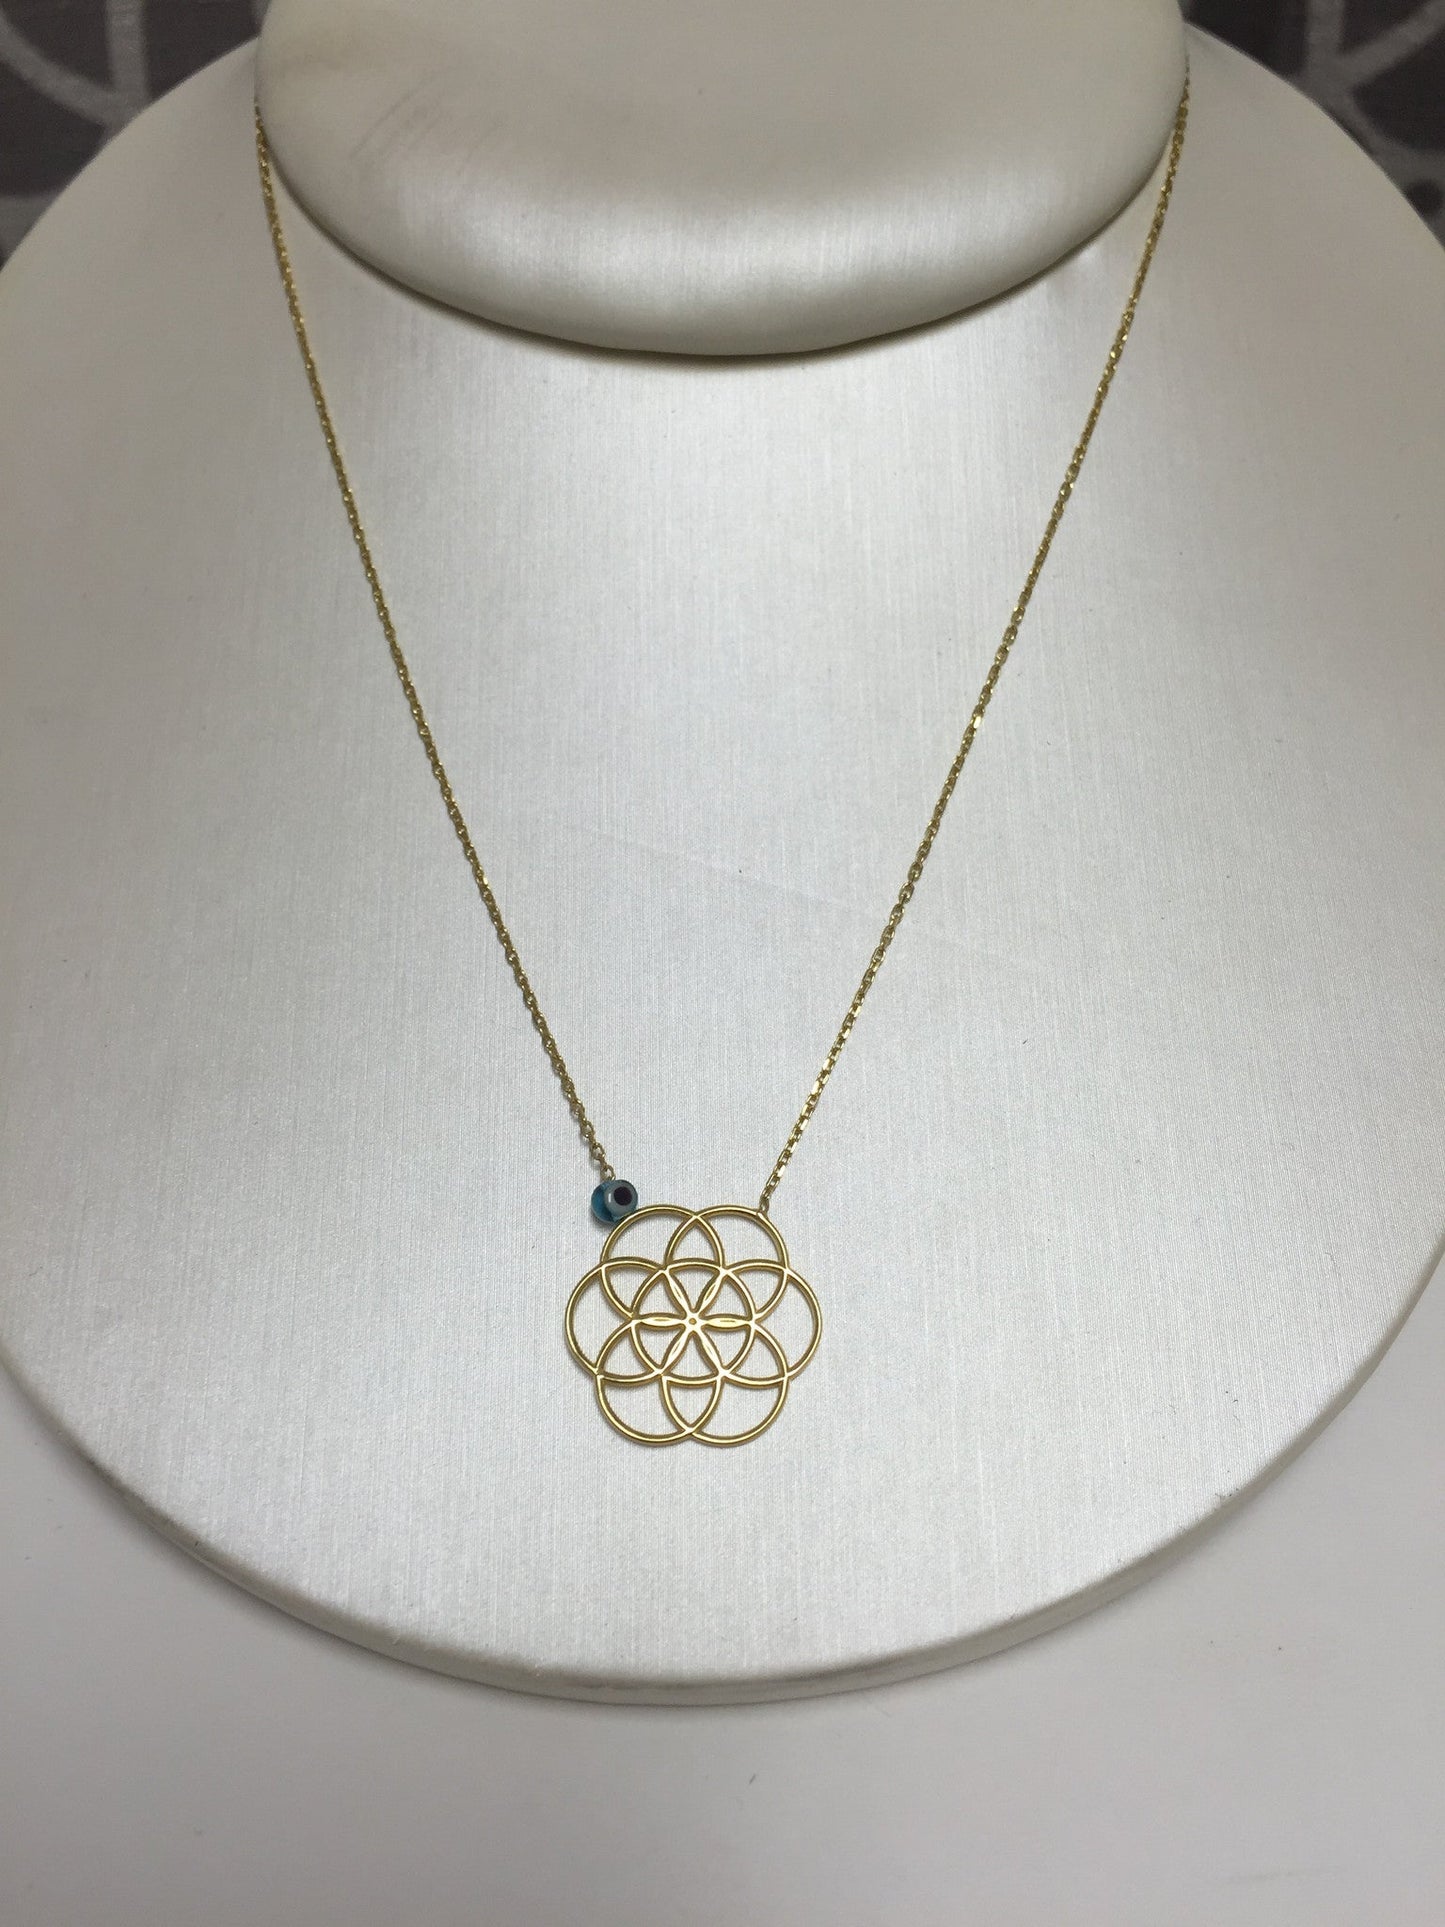 Seed of Life 24K Gold Necklace